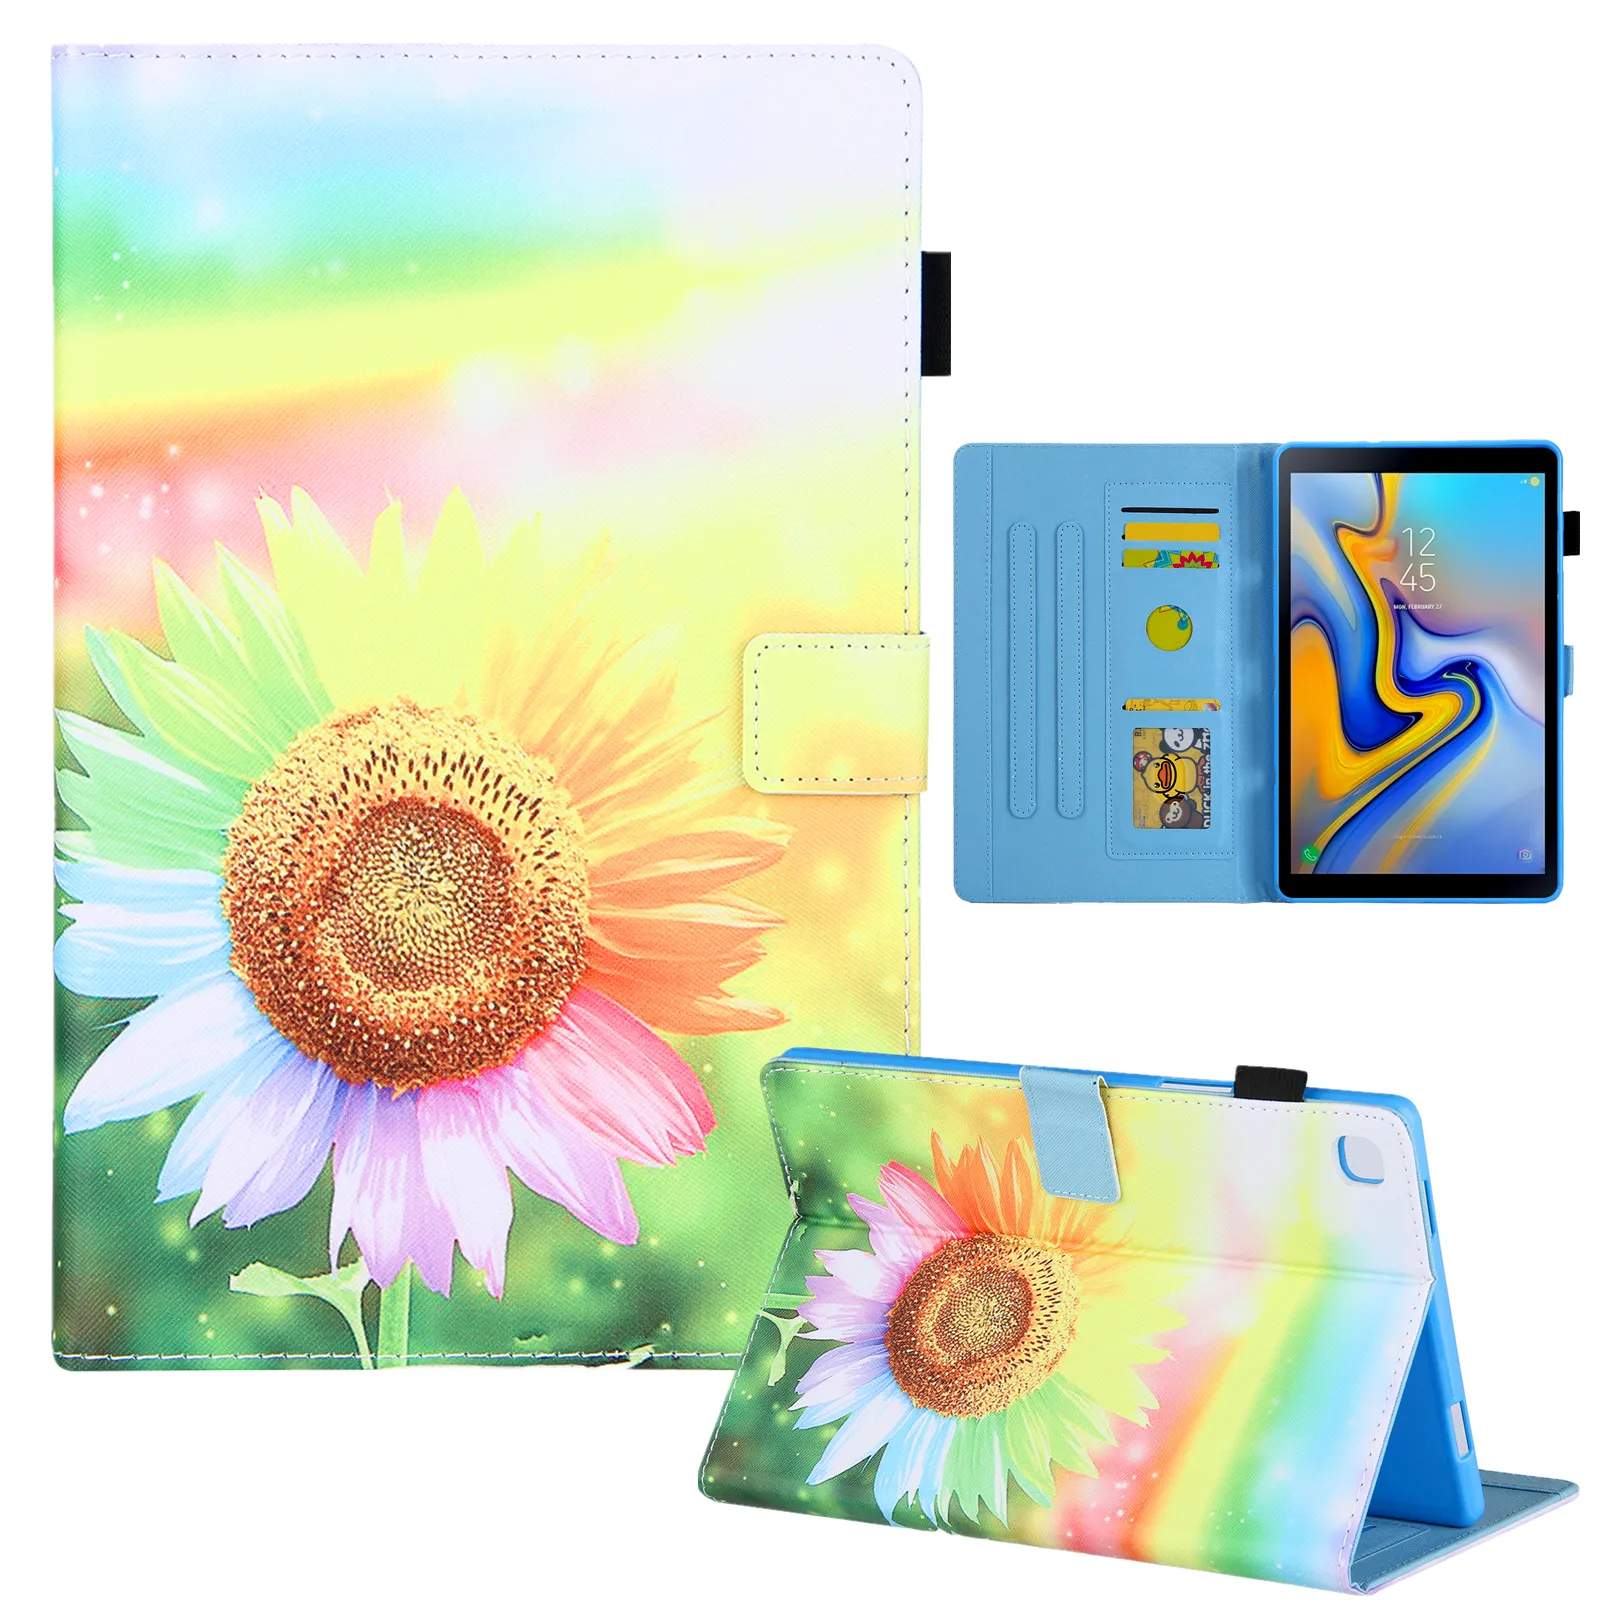 Printed Design 10.4" Back Cover For samsung A7 Tablet Case Galaxy Tab A 7 2020 SM-T500/SM-T505